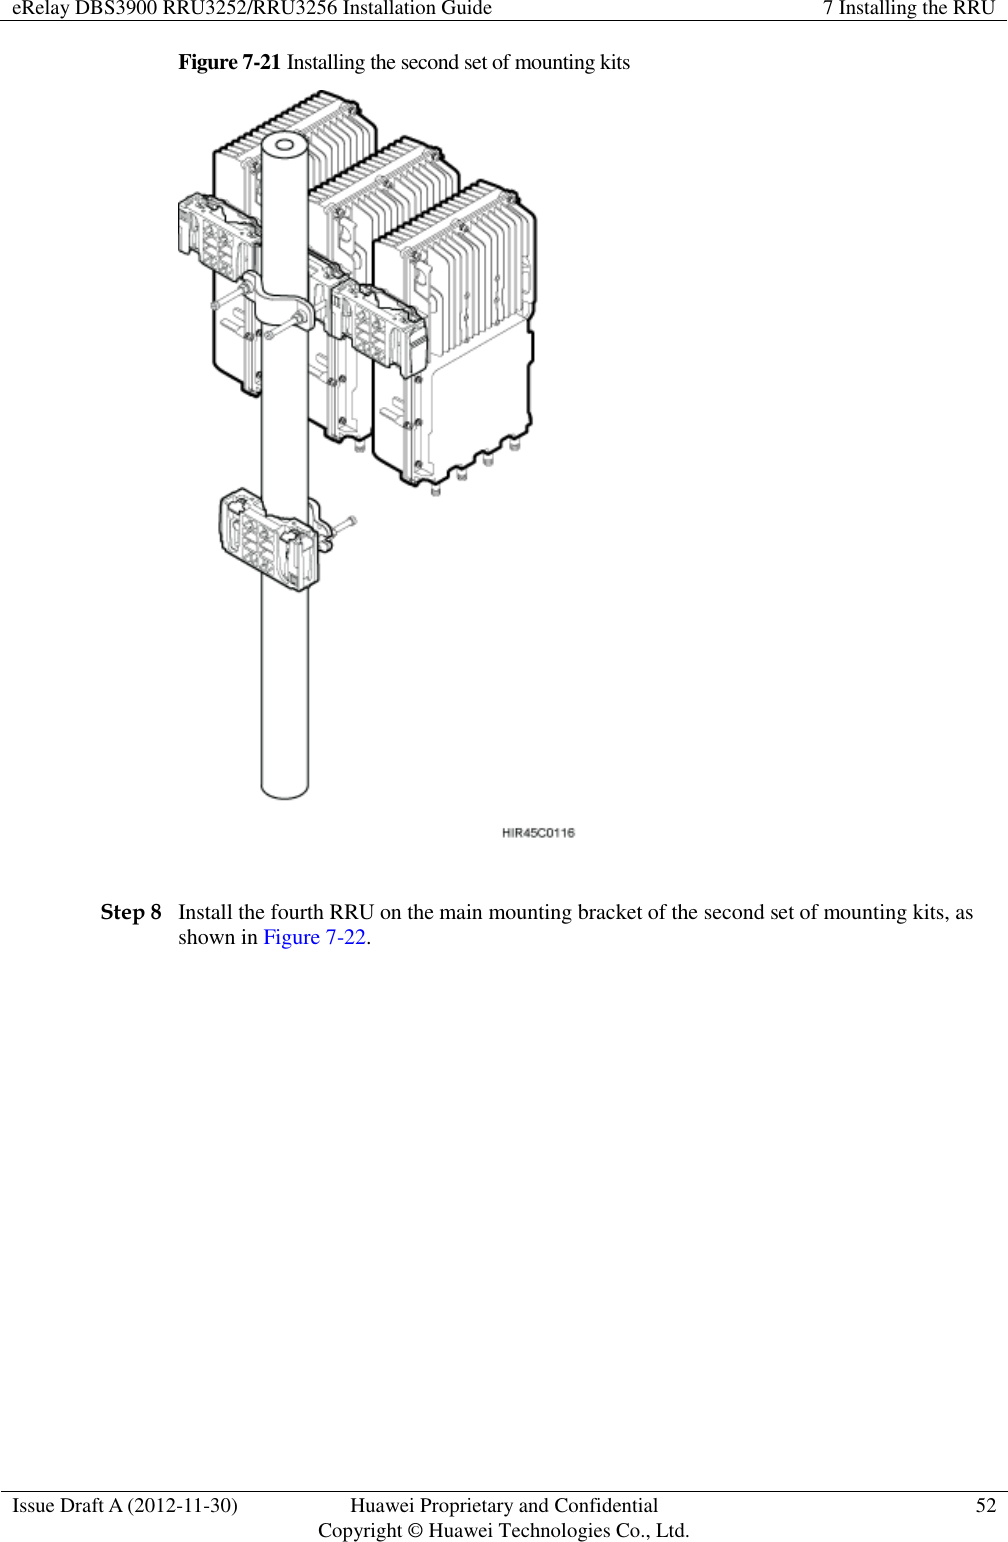 eRelay DBS3900 RRU3252/RRU3256 Installation Guide 7 Installing the RRU  Issue Draft A (2012-11-30) Huawei Proprietary and Confidential                                     Copyright © Huawei Technologies Co., Ltd. 52  Figure 7-21 Installing the second set of mounting kits   Step 8 Install the fourth RRU on the main mounting bracket of the second set of mounting kits, as shown in Figure 7-22. 